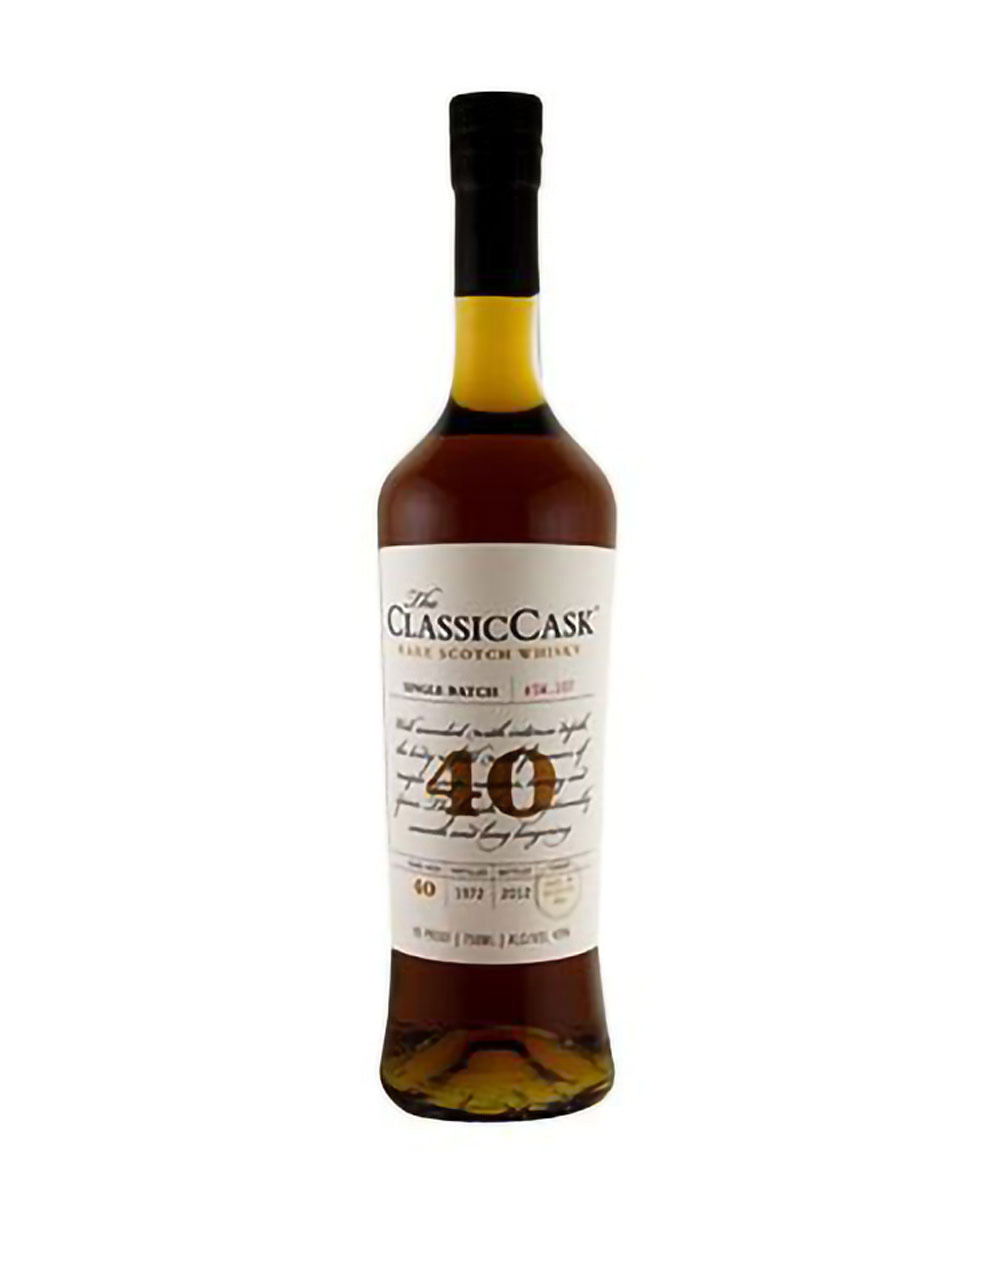 The Classic Cask 40 Year Old Rare Scotch Whisky